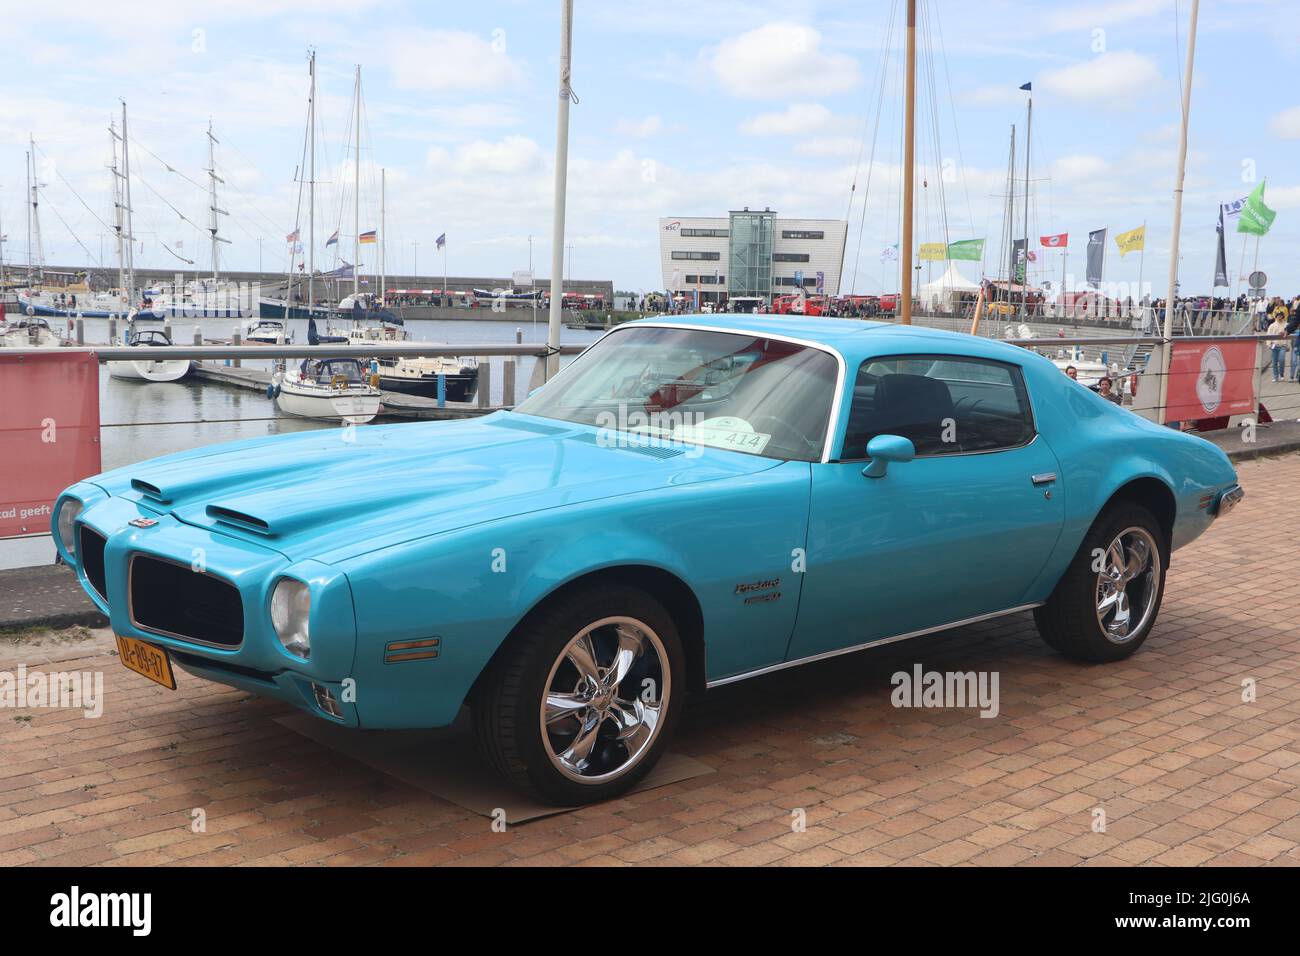 blue american muscle car Pontiac Firebird Formula 400 on old timer day in dutch city Lelystad, the Netherlands - June 19 2022 Stock Photo